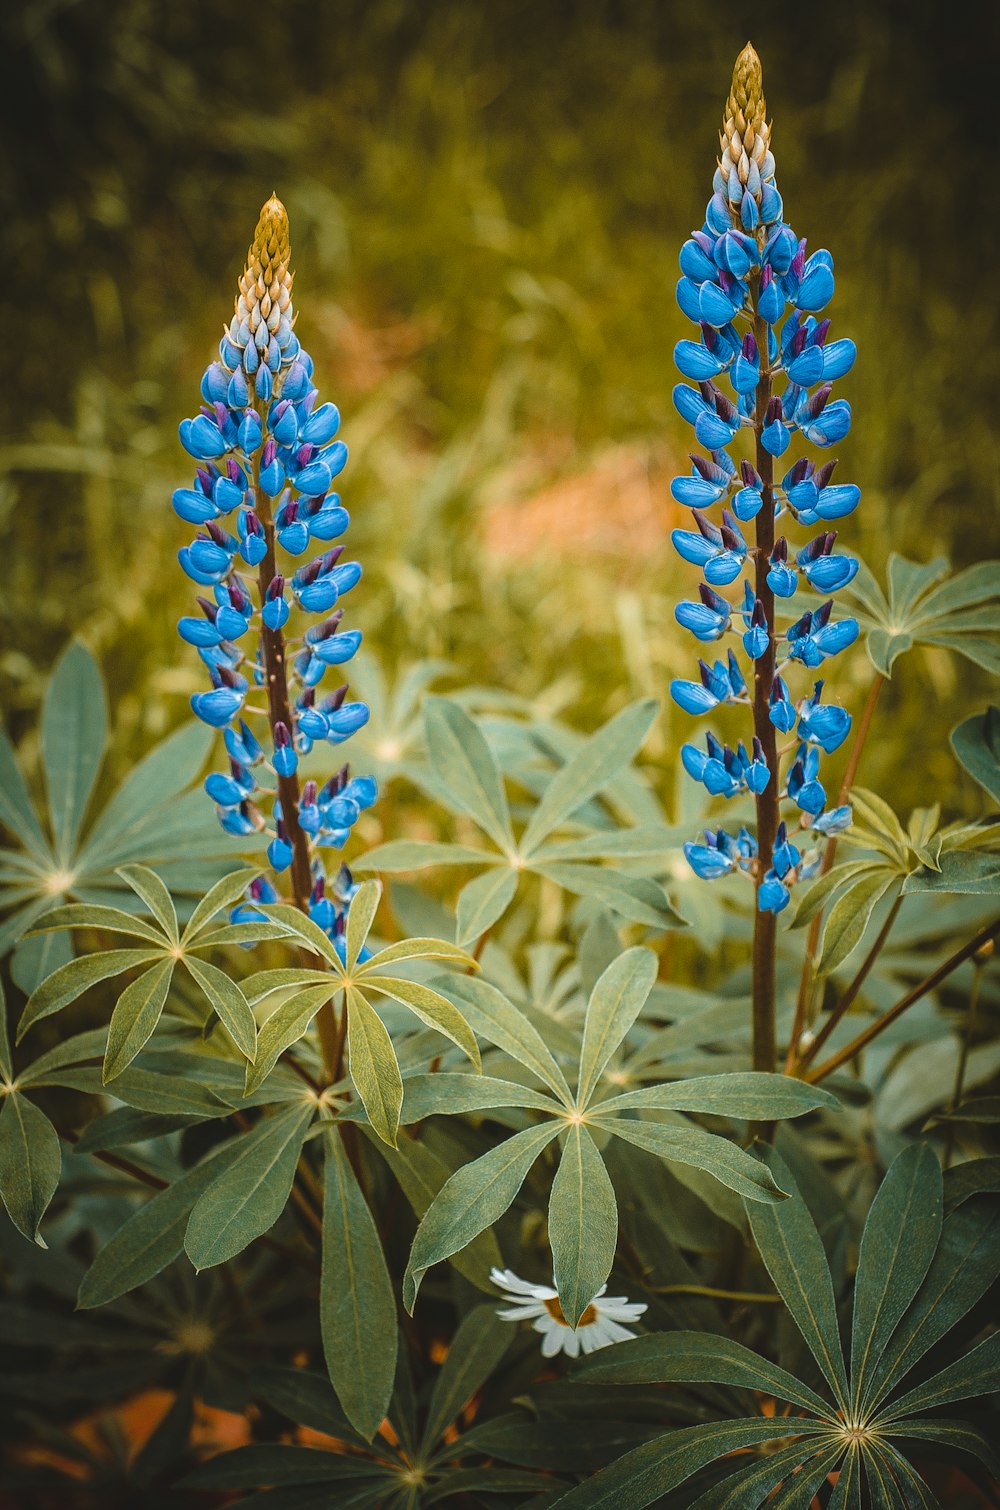 blue and white flower buds